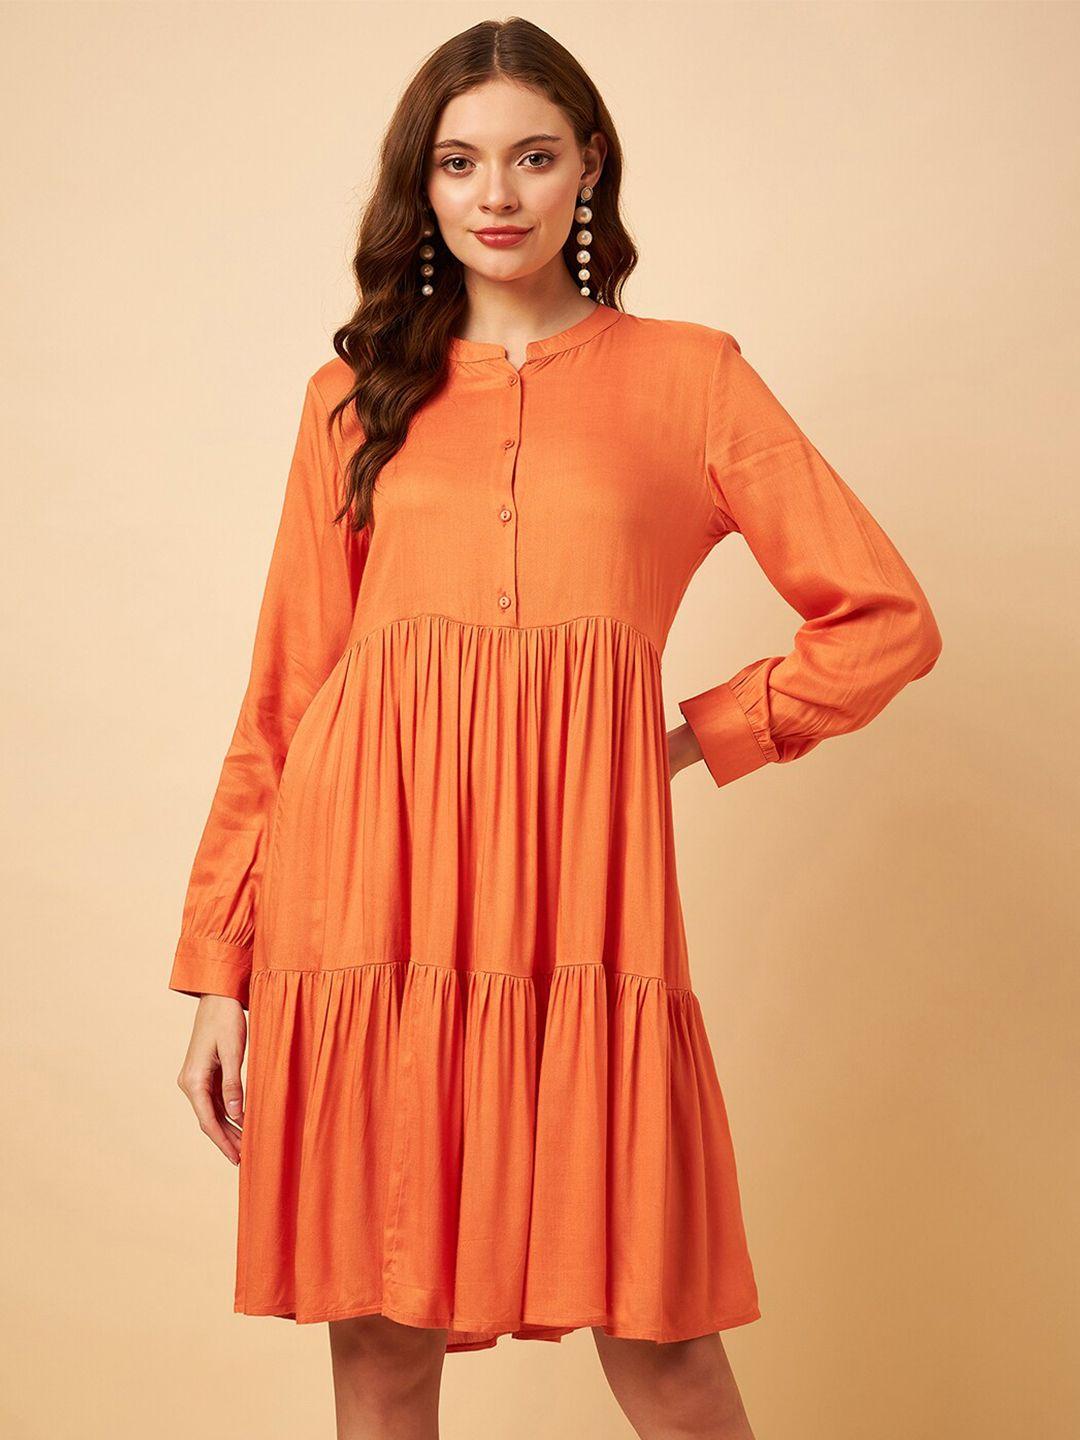 style blush mandarin collar tiered gathered fit and flare dress